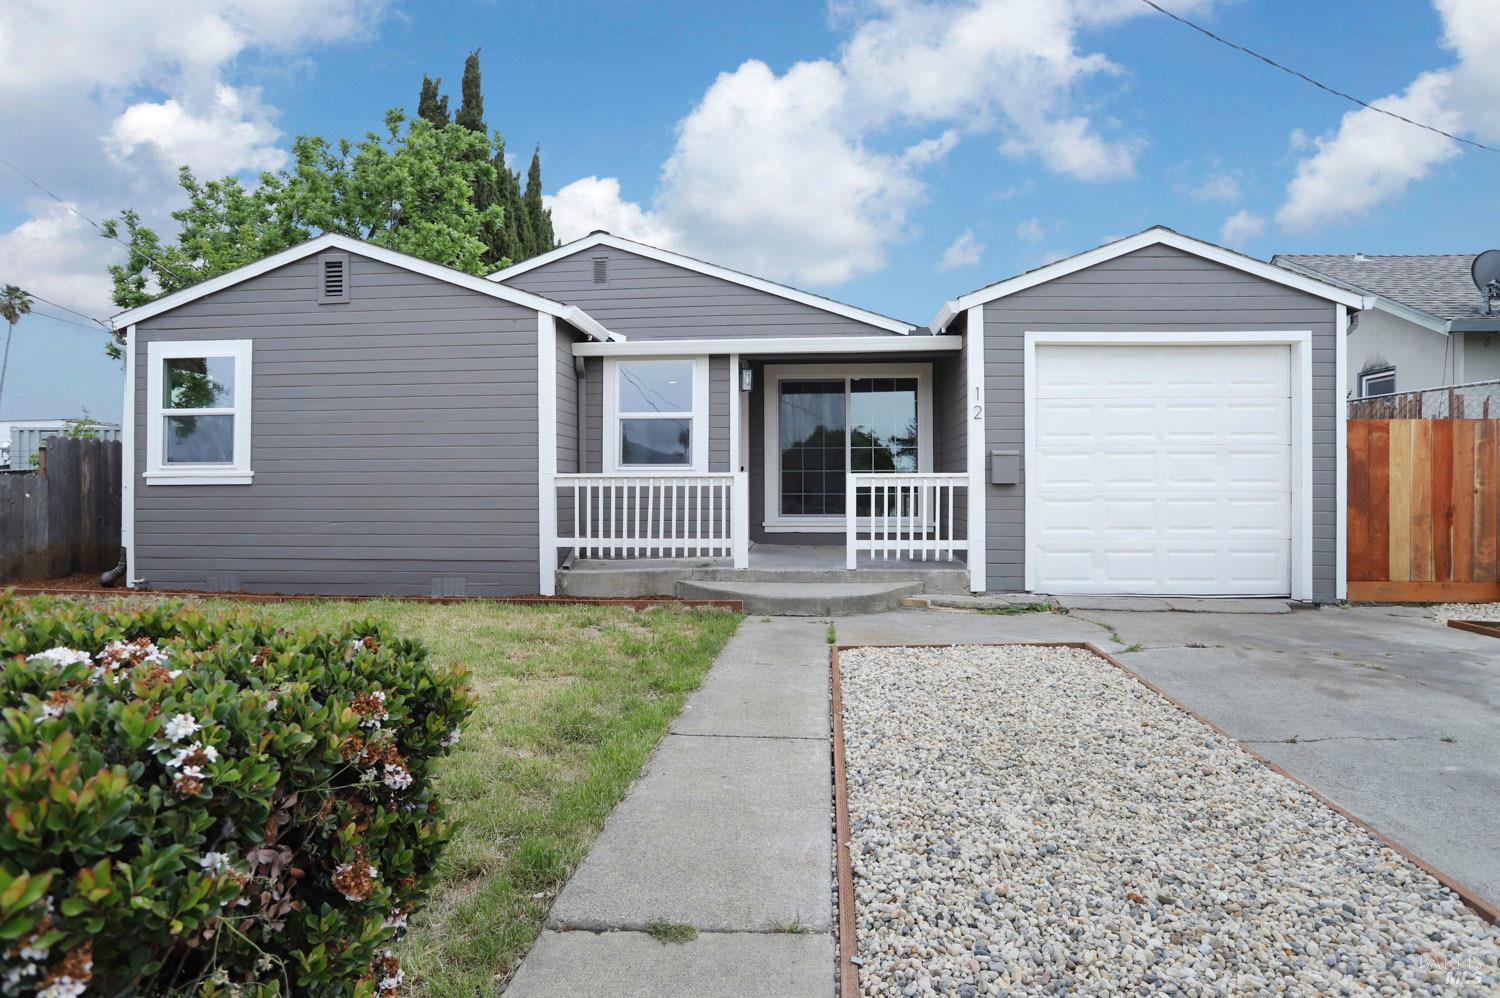 Completely remodeled 3 bed 2 bath & 1512 sqft home with a large 400 sqft garage/workshop in the back